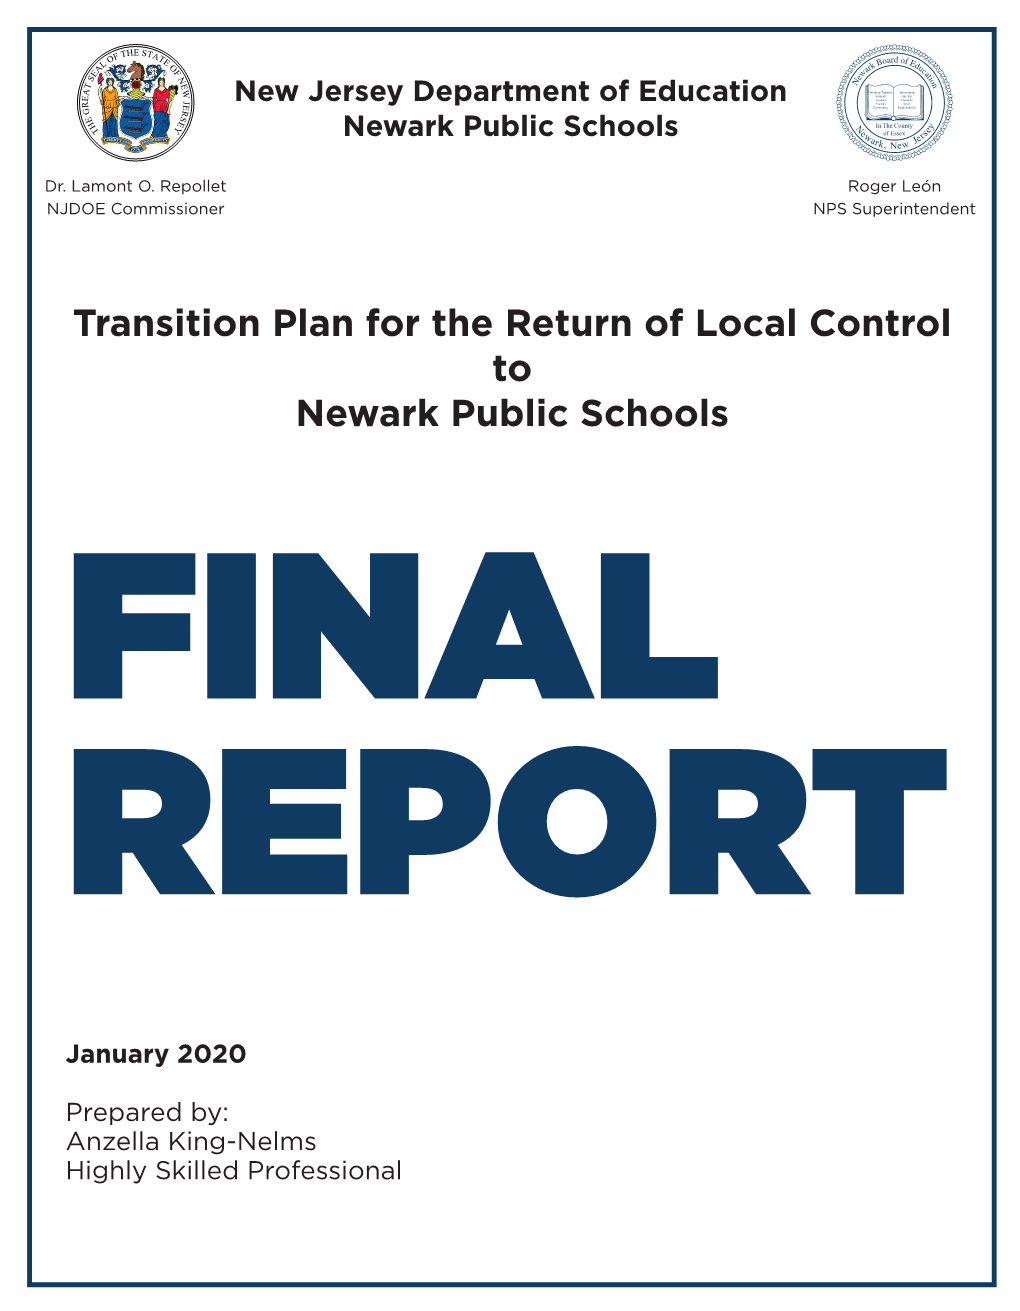 Transition Plan for the Return of Local Control to Newark Public Schools FINAL REPORT